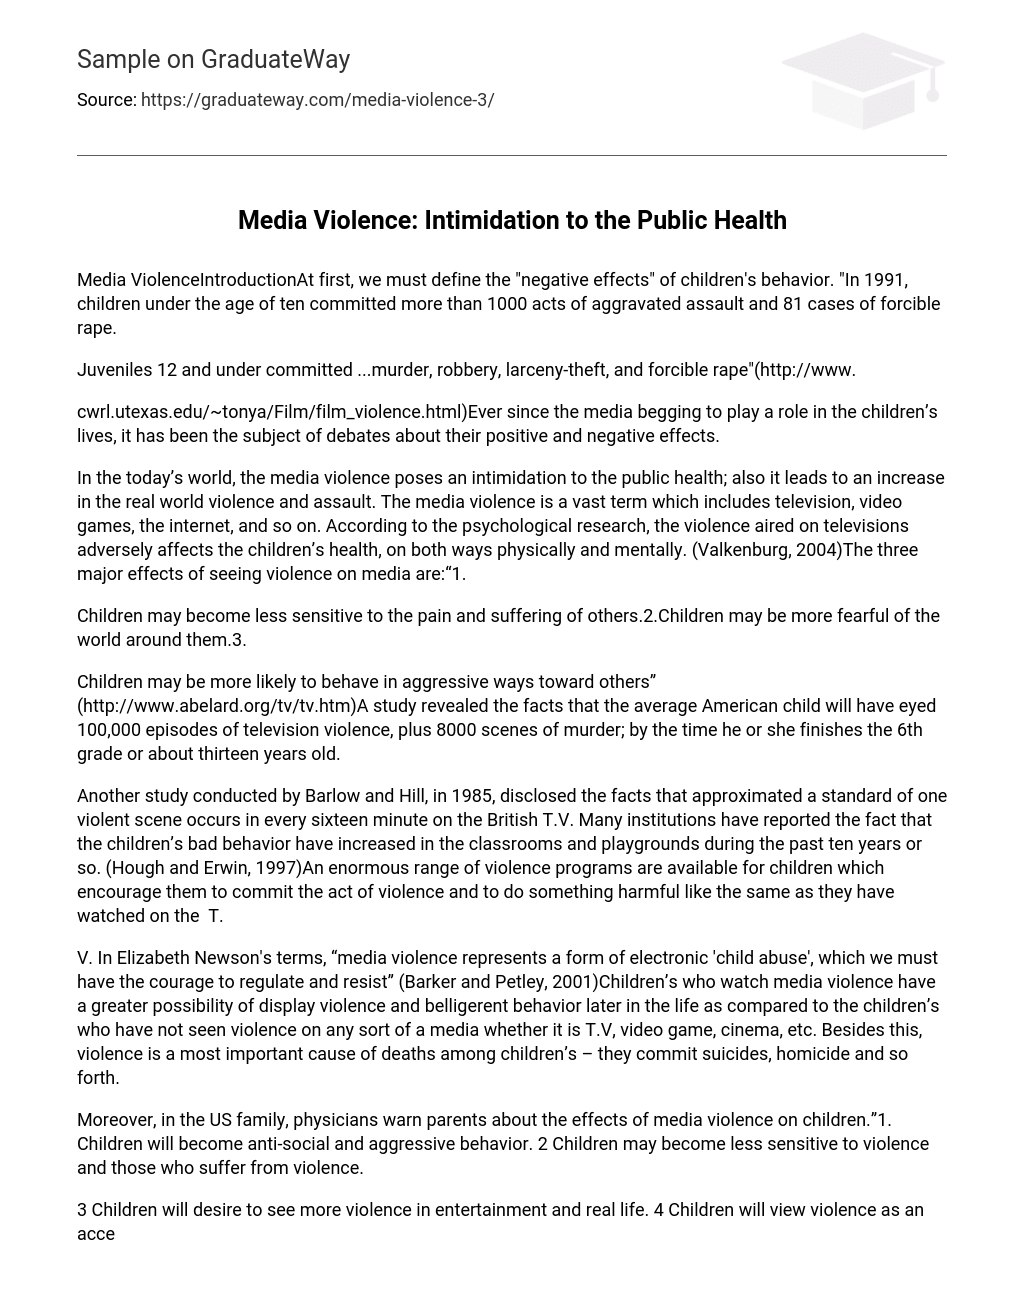 Media Violence: Intimidation to the Public Health